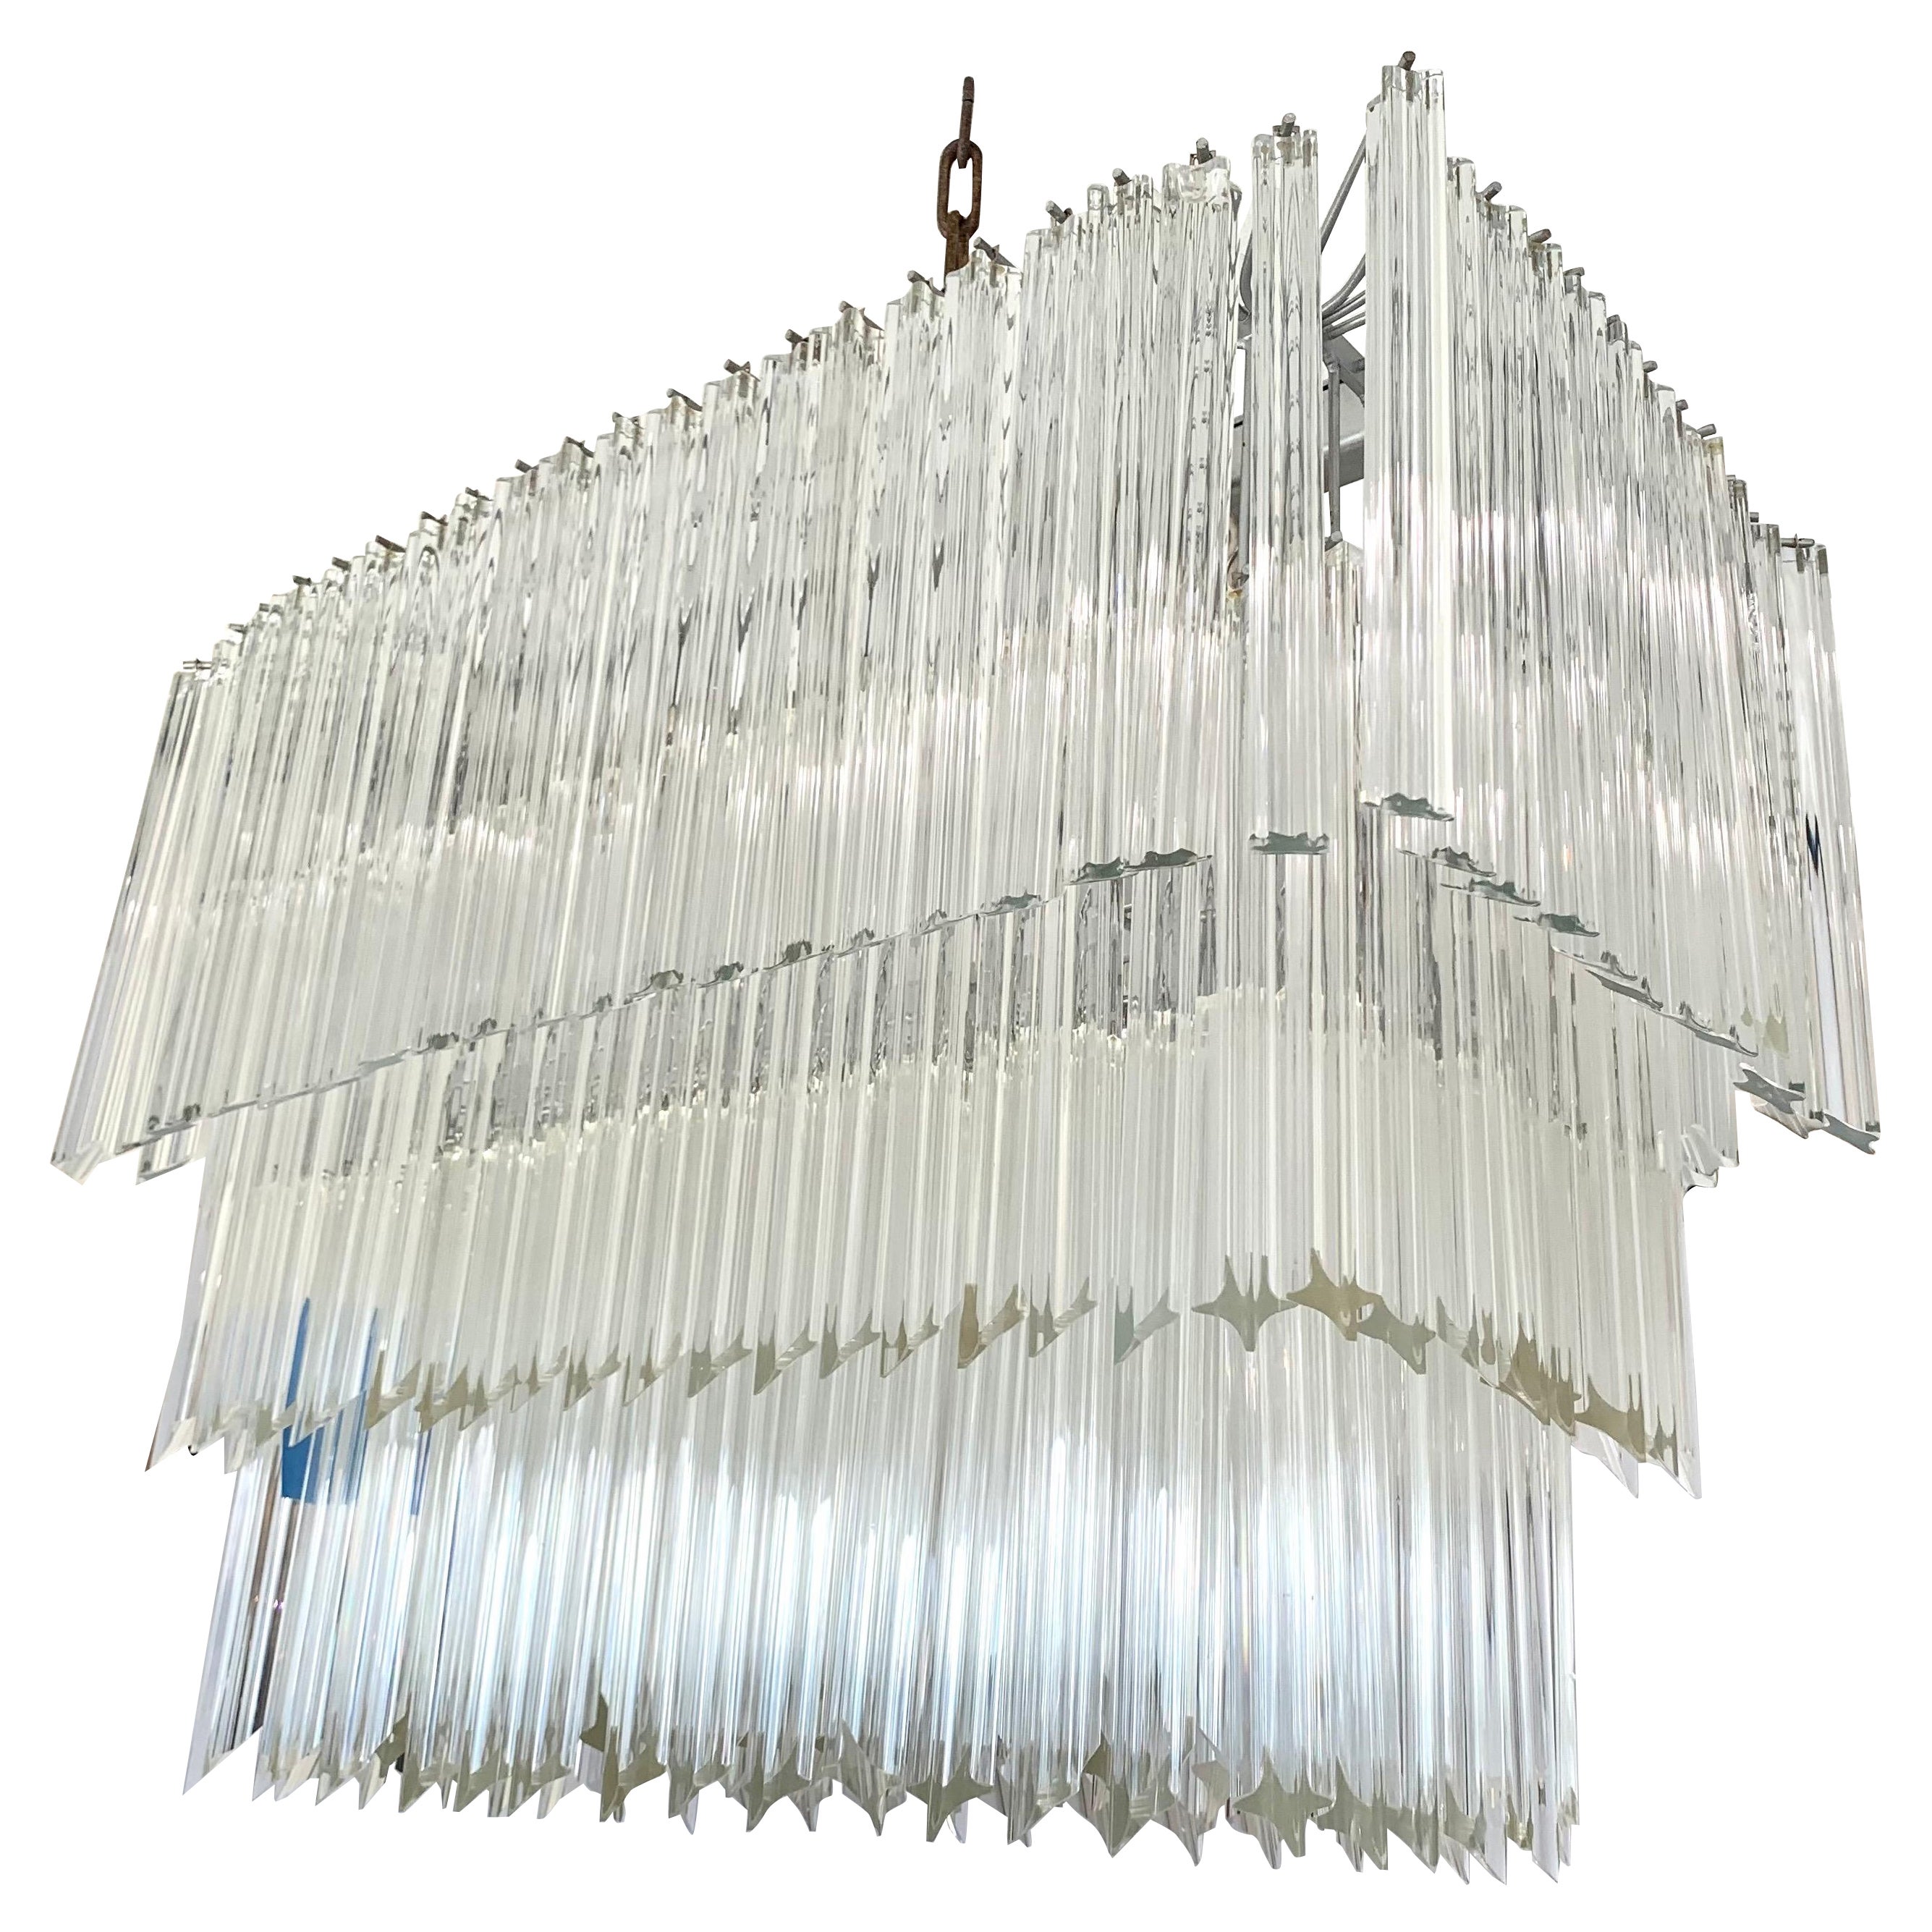 Stunning XL Camer Glass Venini Murano Glass Rectagular Tiered Chandelier For Sale